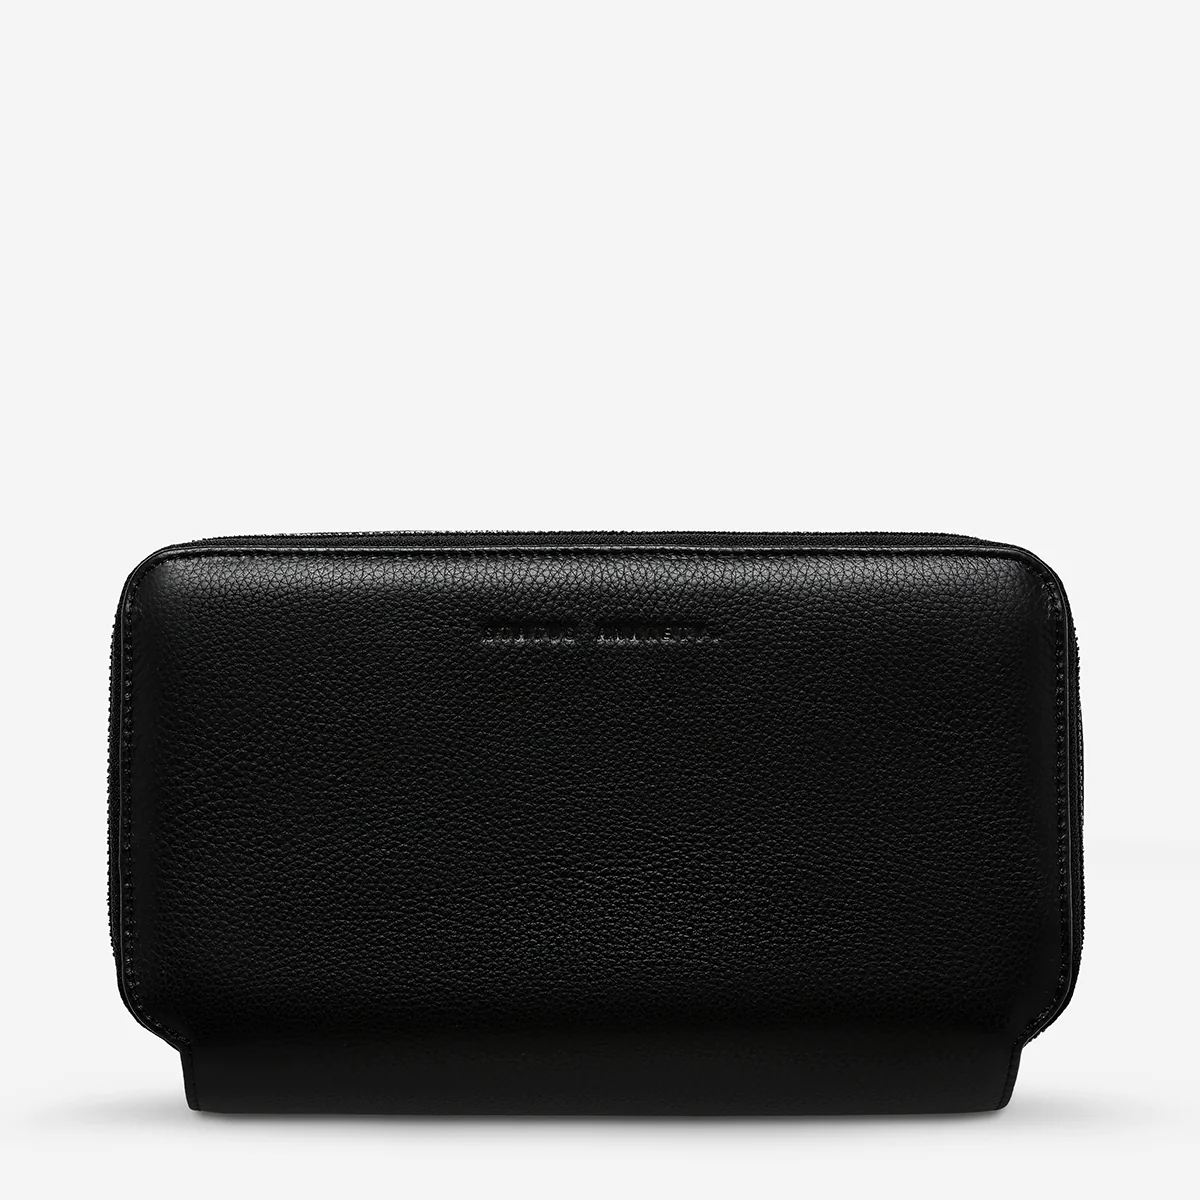 status-anxiety-wallet-home-soon-black-front.webp